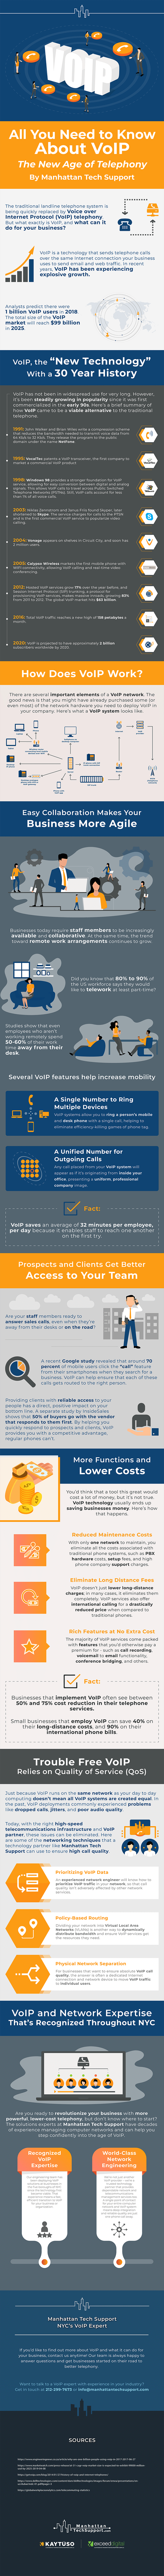 MTS-infographic_VOIP